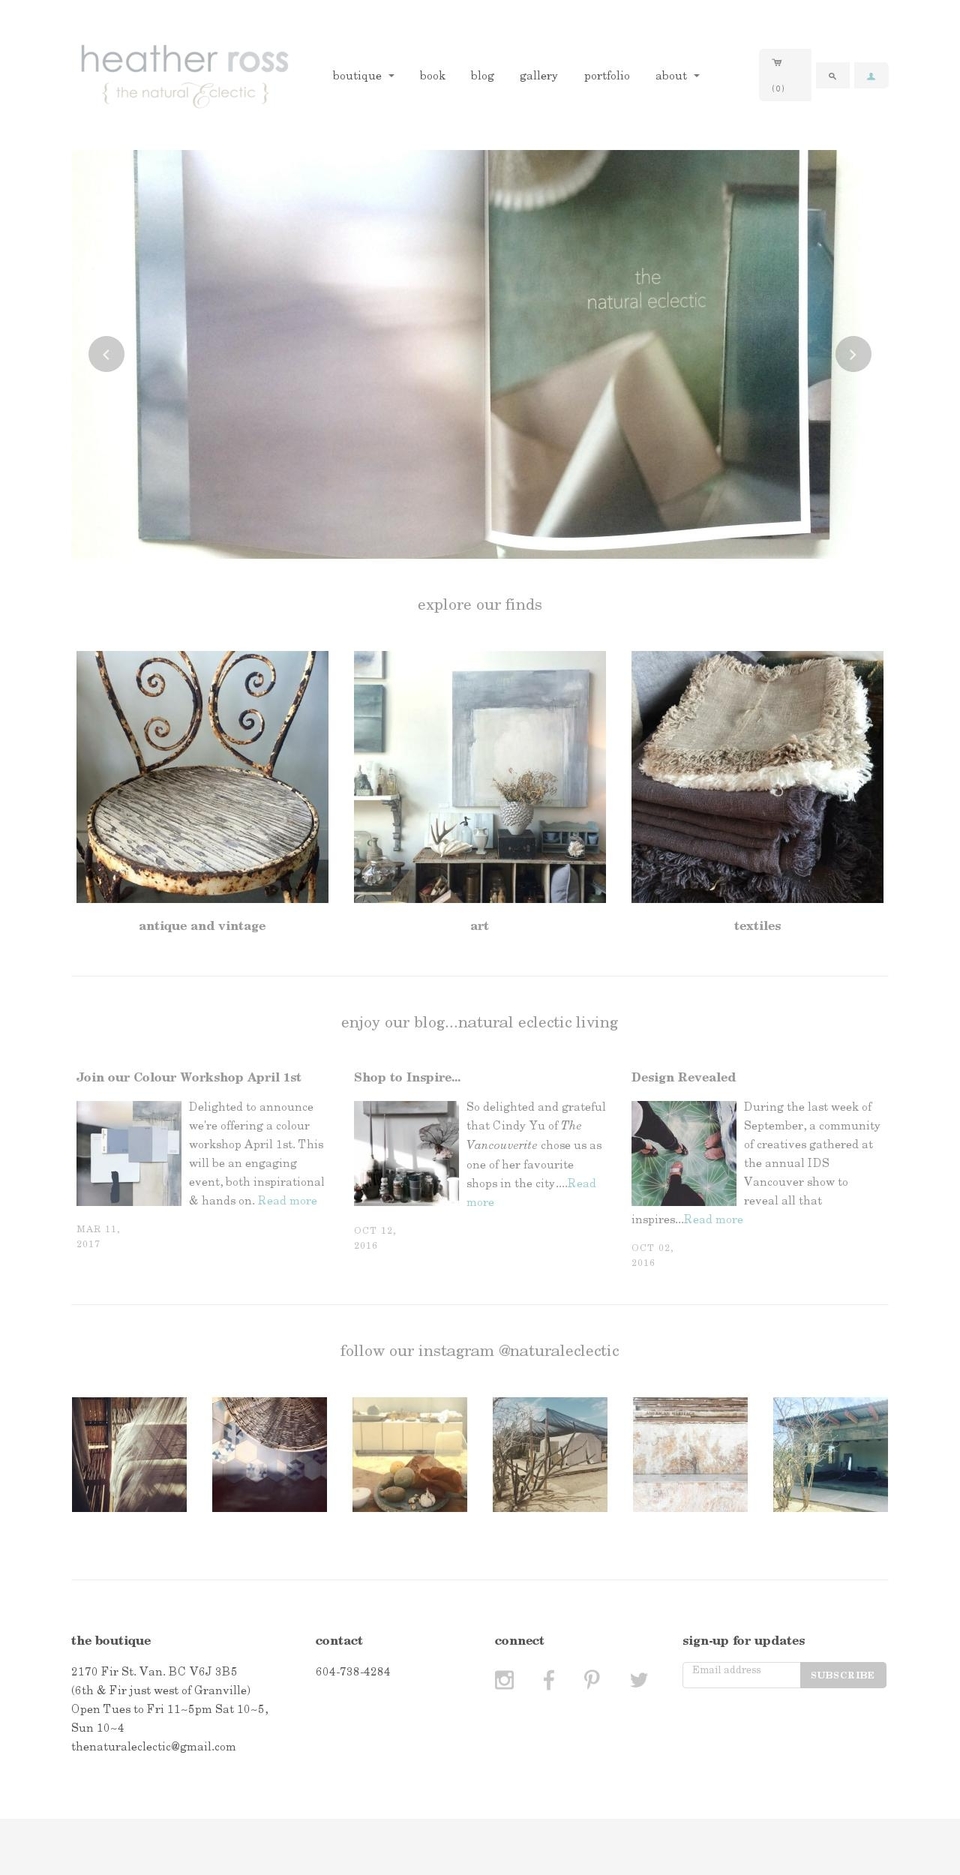 Cypress Shopify theme site example naturaleclectic.com